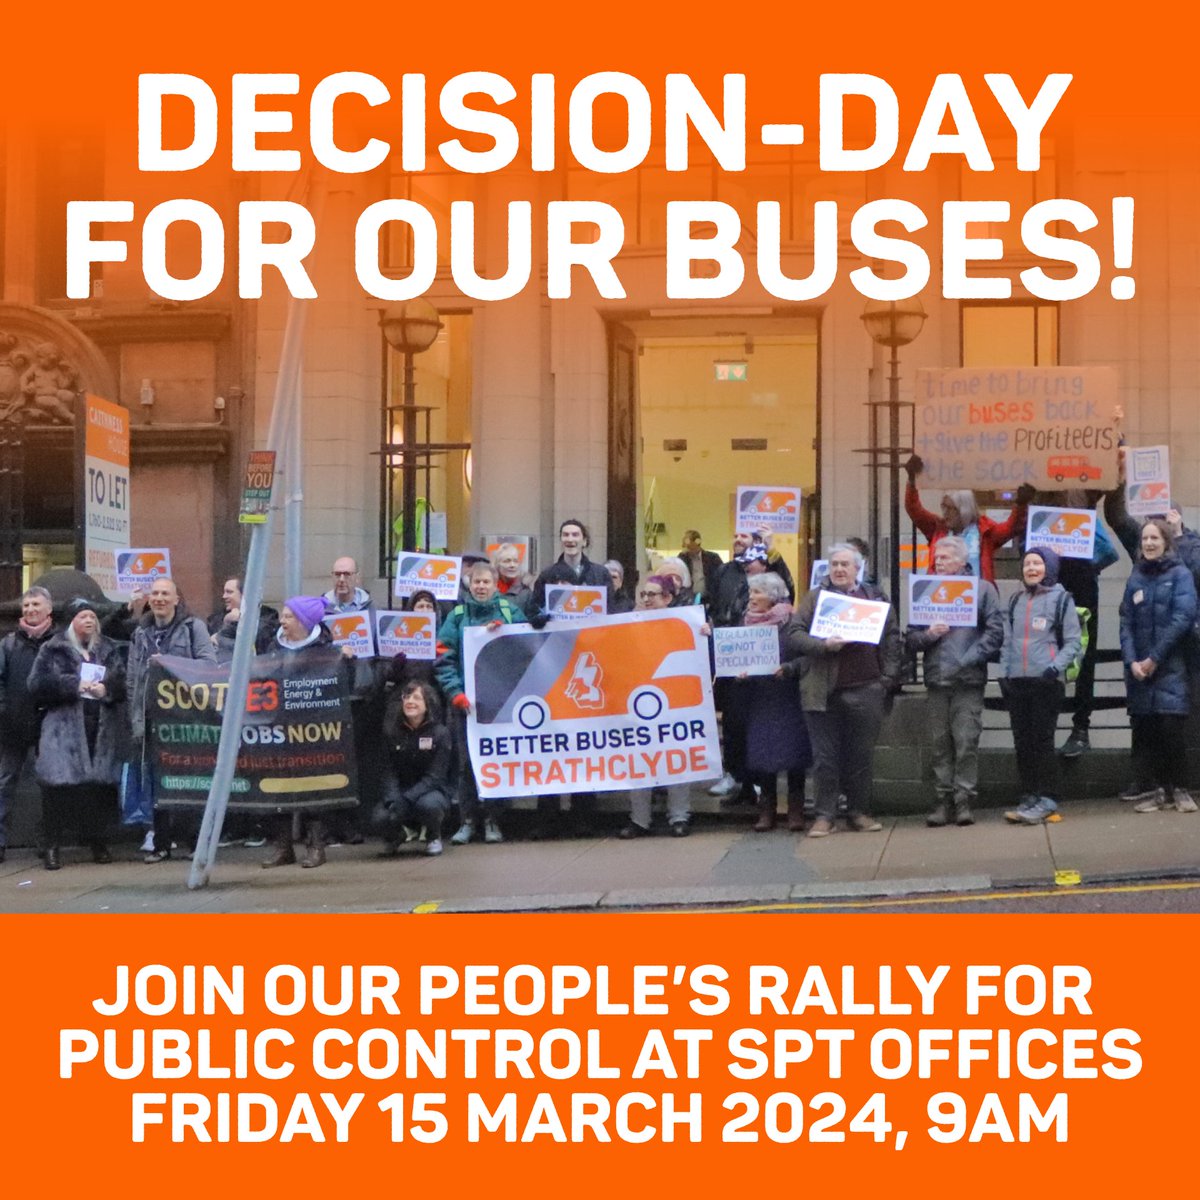 This Friday is Decision-Day for our buses!🚍 The @SPTcorporate Board is meeting to choose whether to use new powers to bring the bus network back into public control🤔 Join our People’s Rally for Public Control: 📅Friday 15 March, 9am 📍SPT Offices, 131 St Vincent St, Glasgow